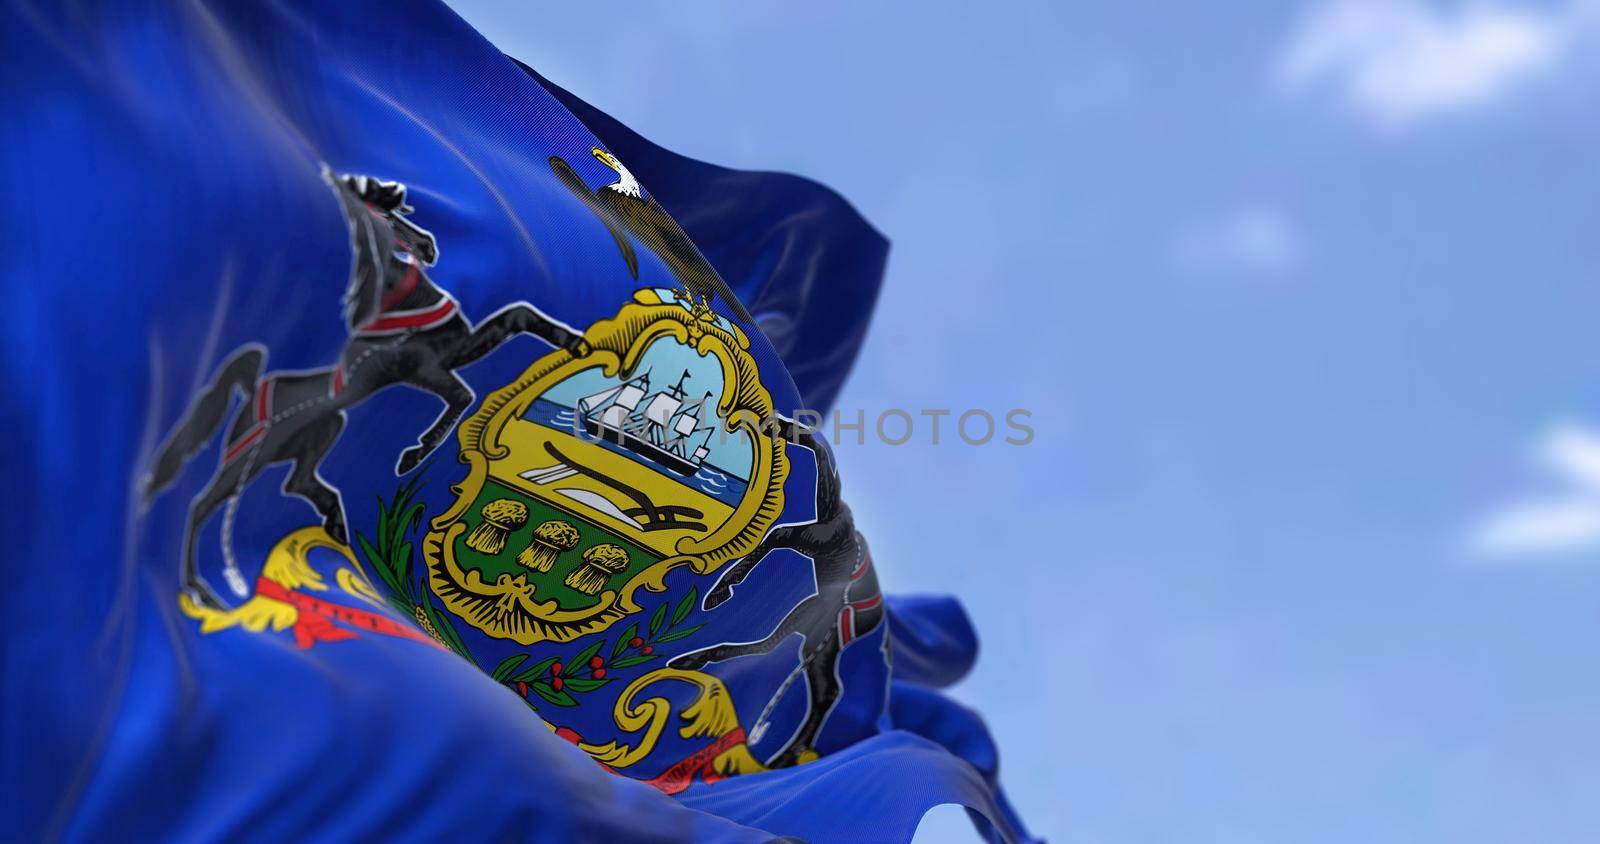 The US state flag of Pennsylvania waving in the wind by rarrarorro